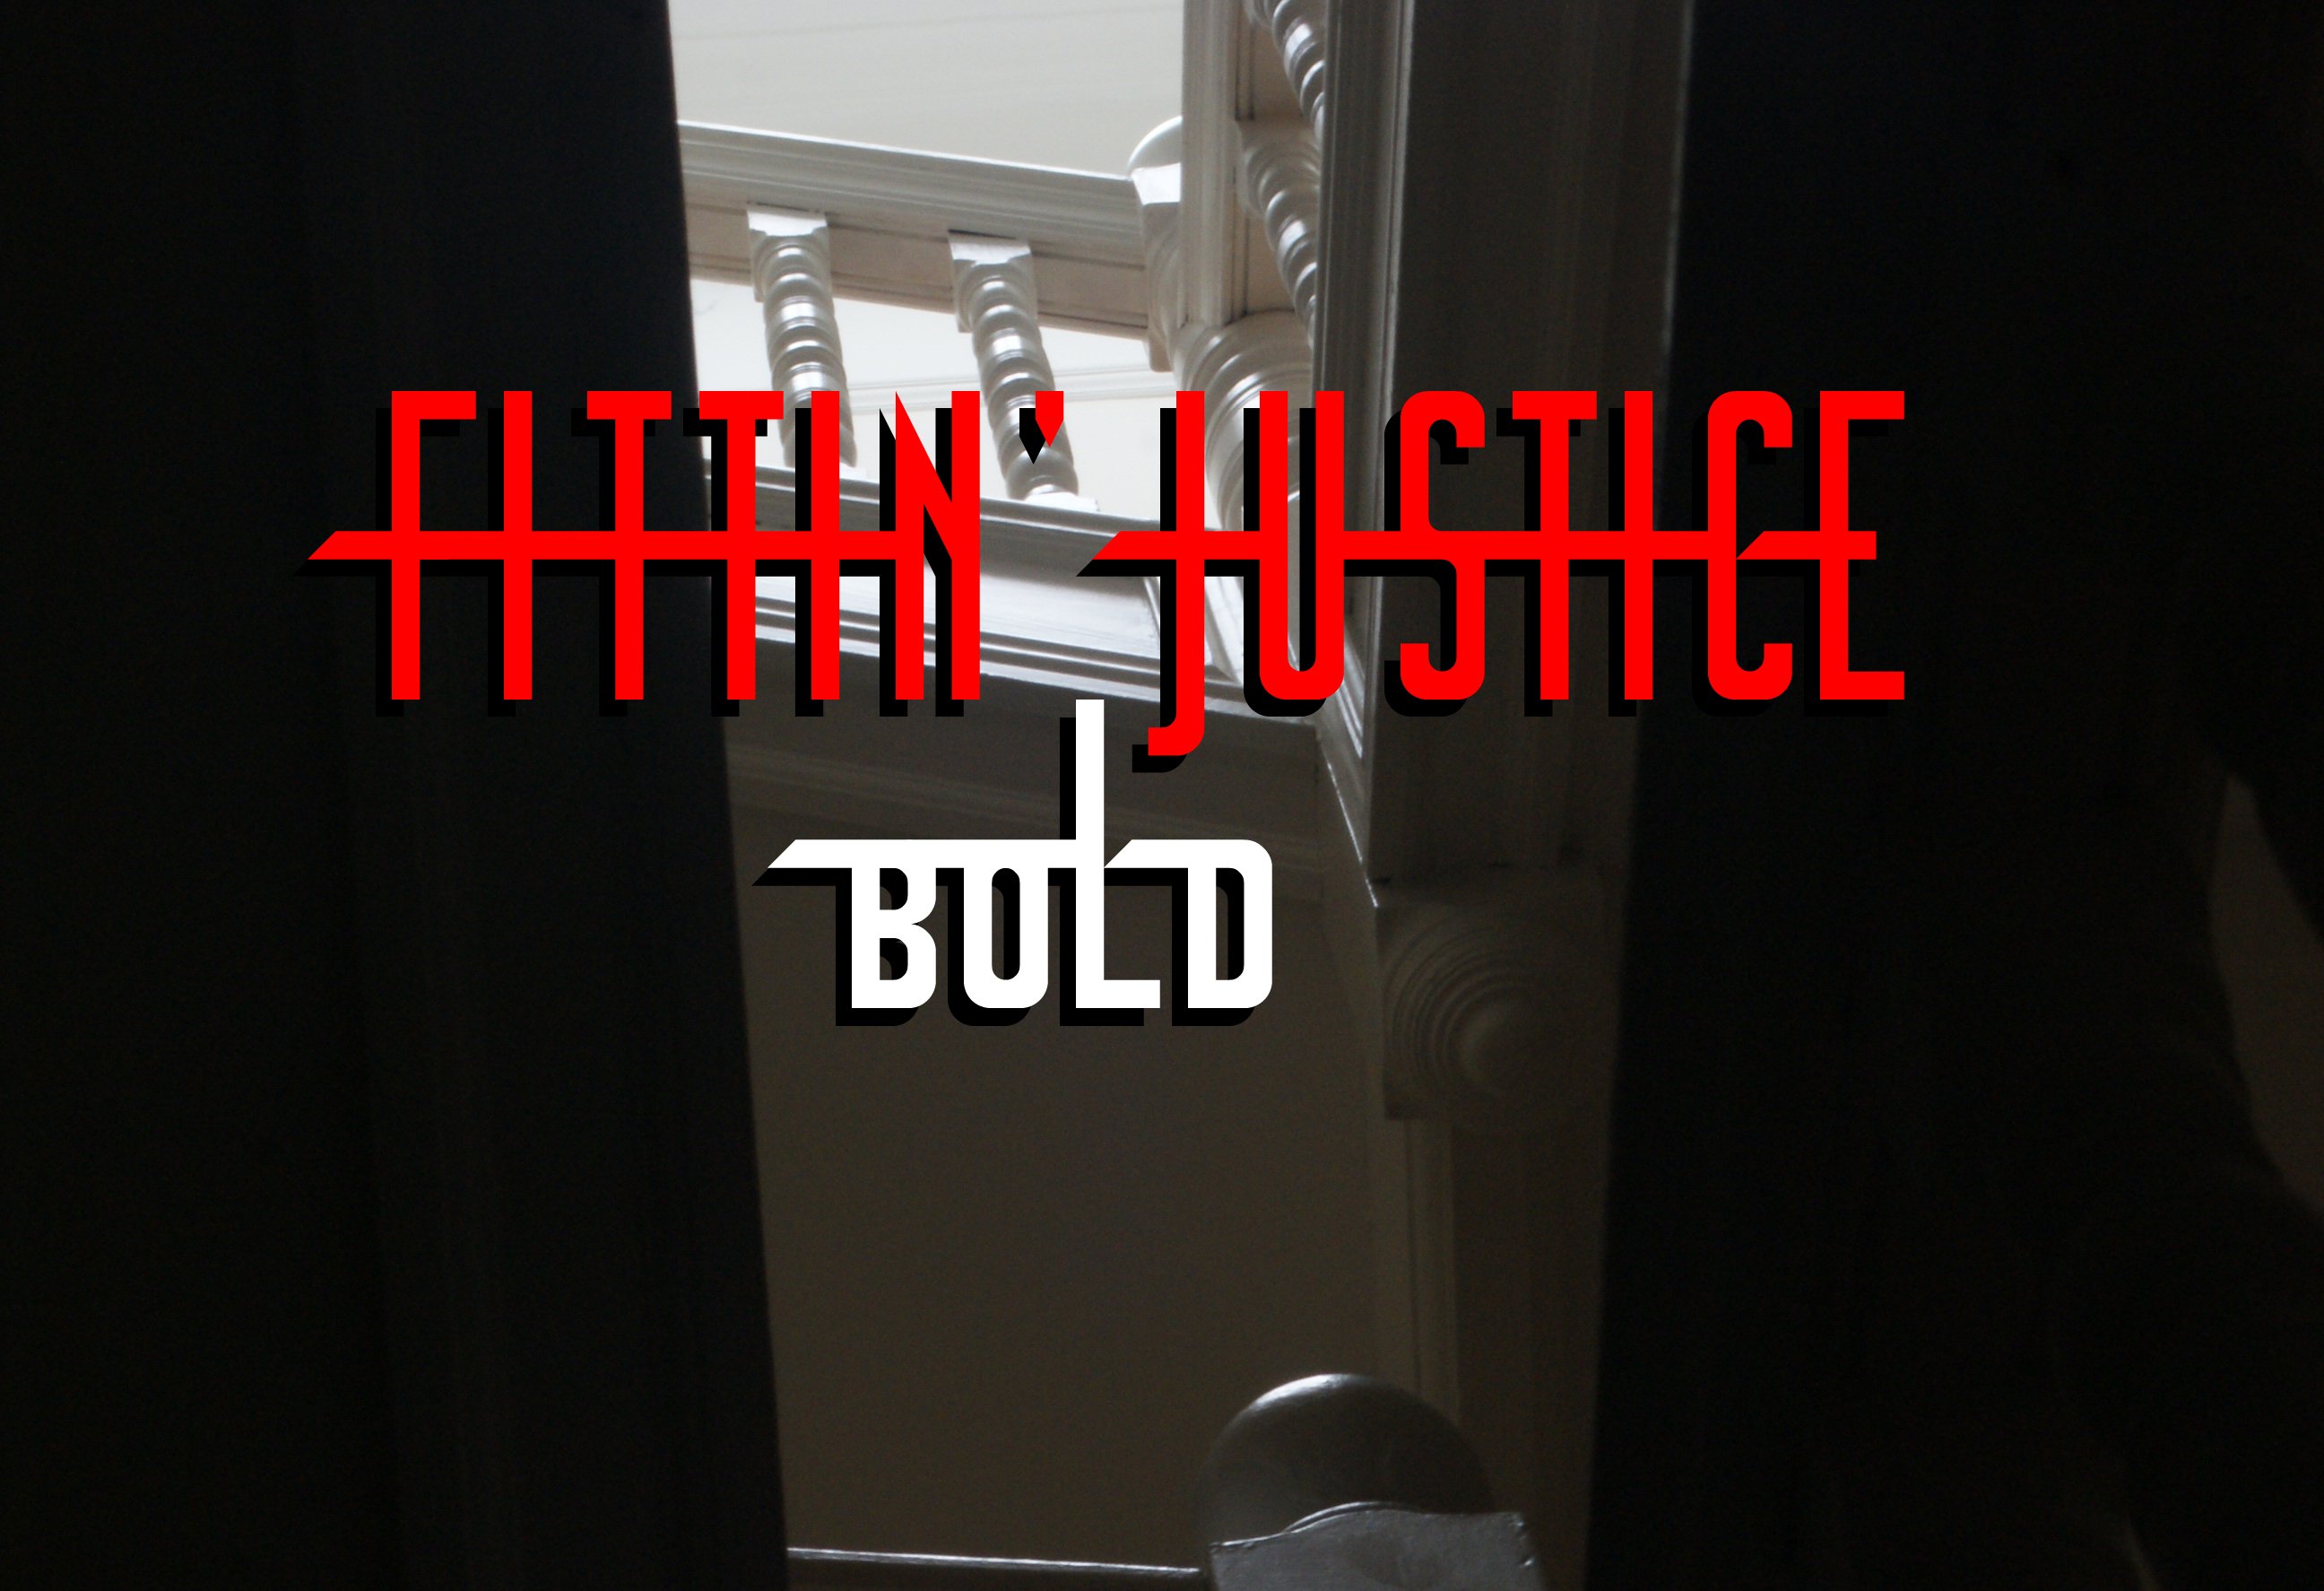 Fittin' Justice Bold cover image.